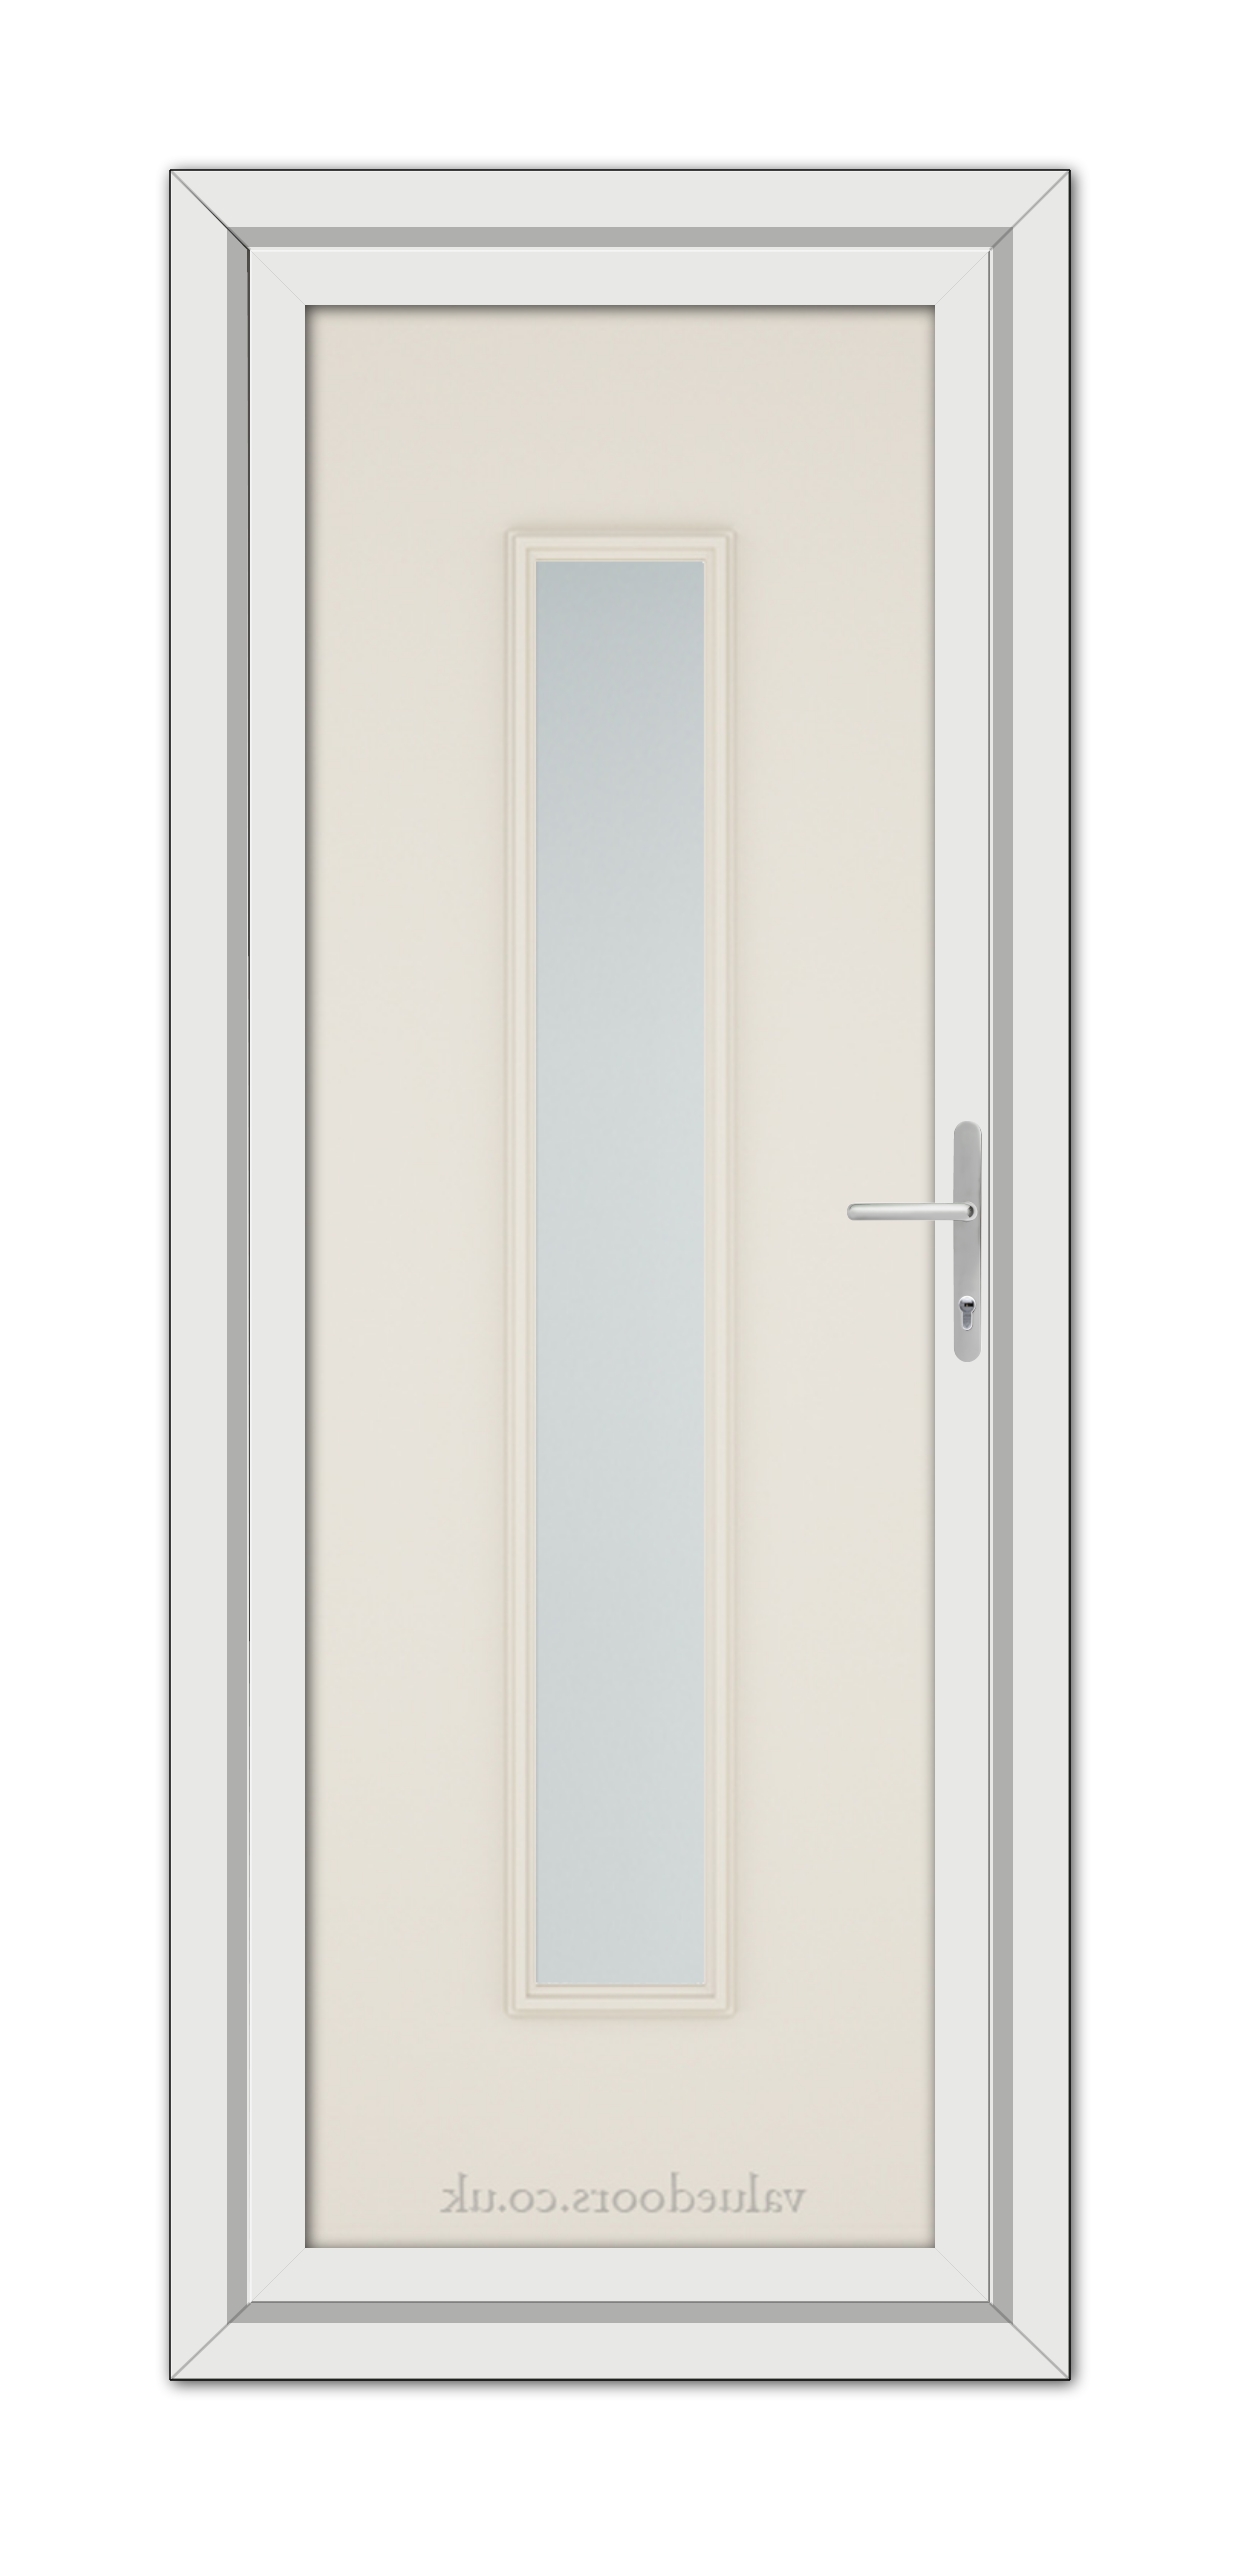 A Cream Rome uPVC Door with a vertical glass panel and a silver handle, framed in white.